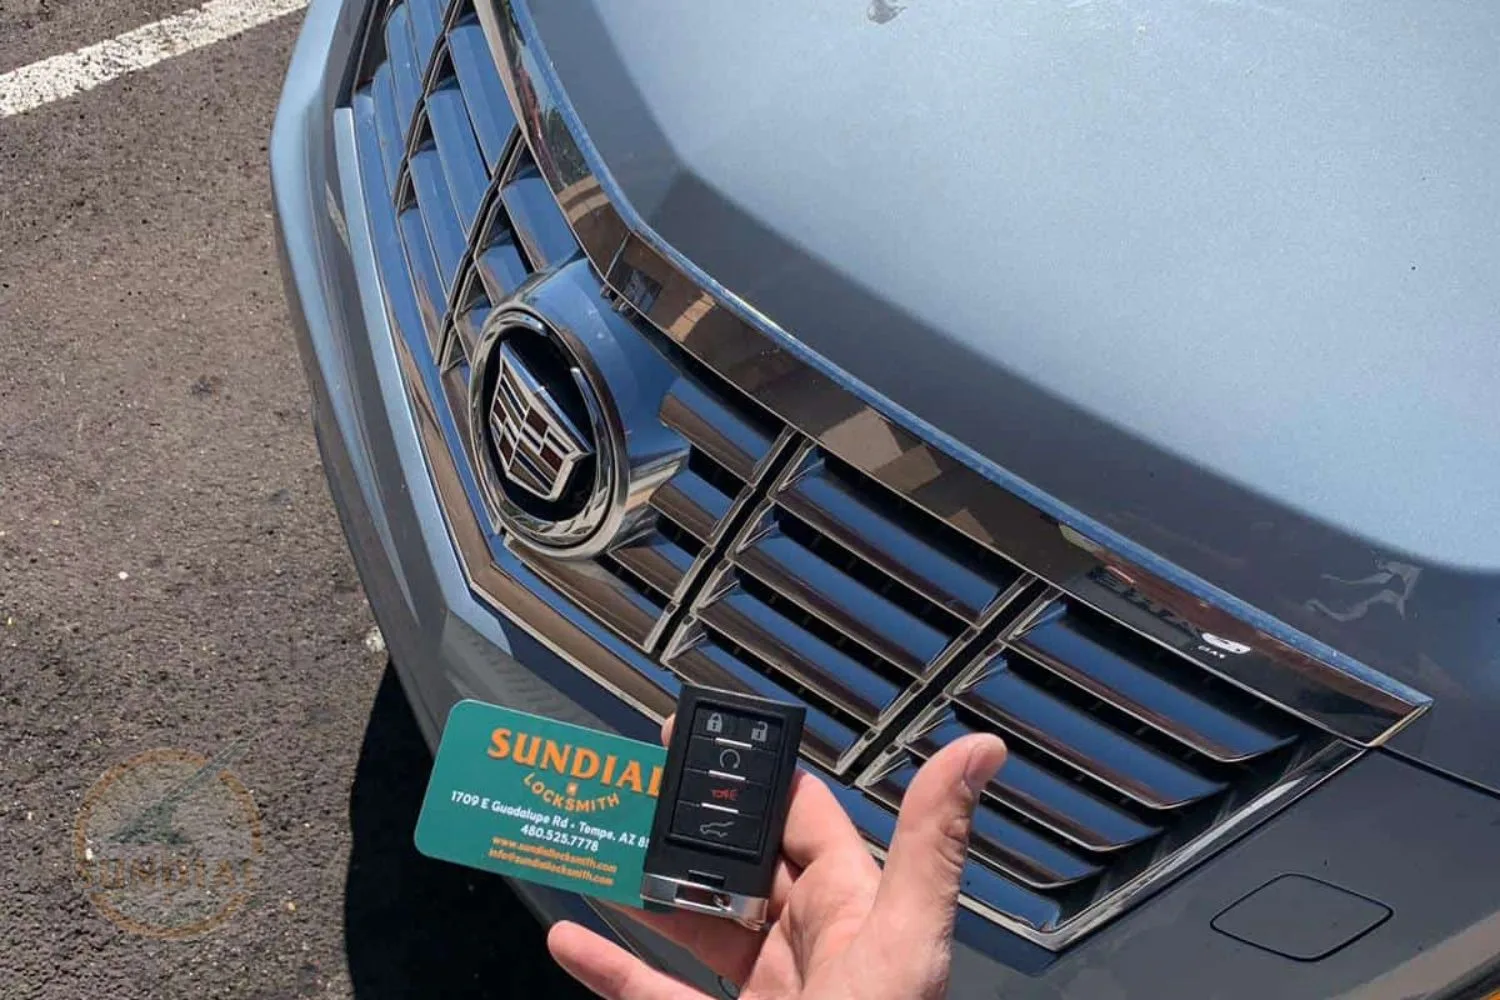 A Cadillac car key fob held in a hand in front of the vehicle's emblem and grille, with a Sundial Locksmith business card visible